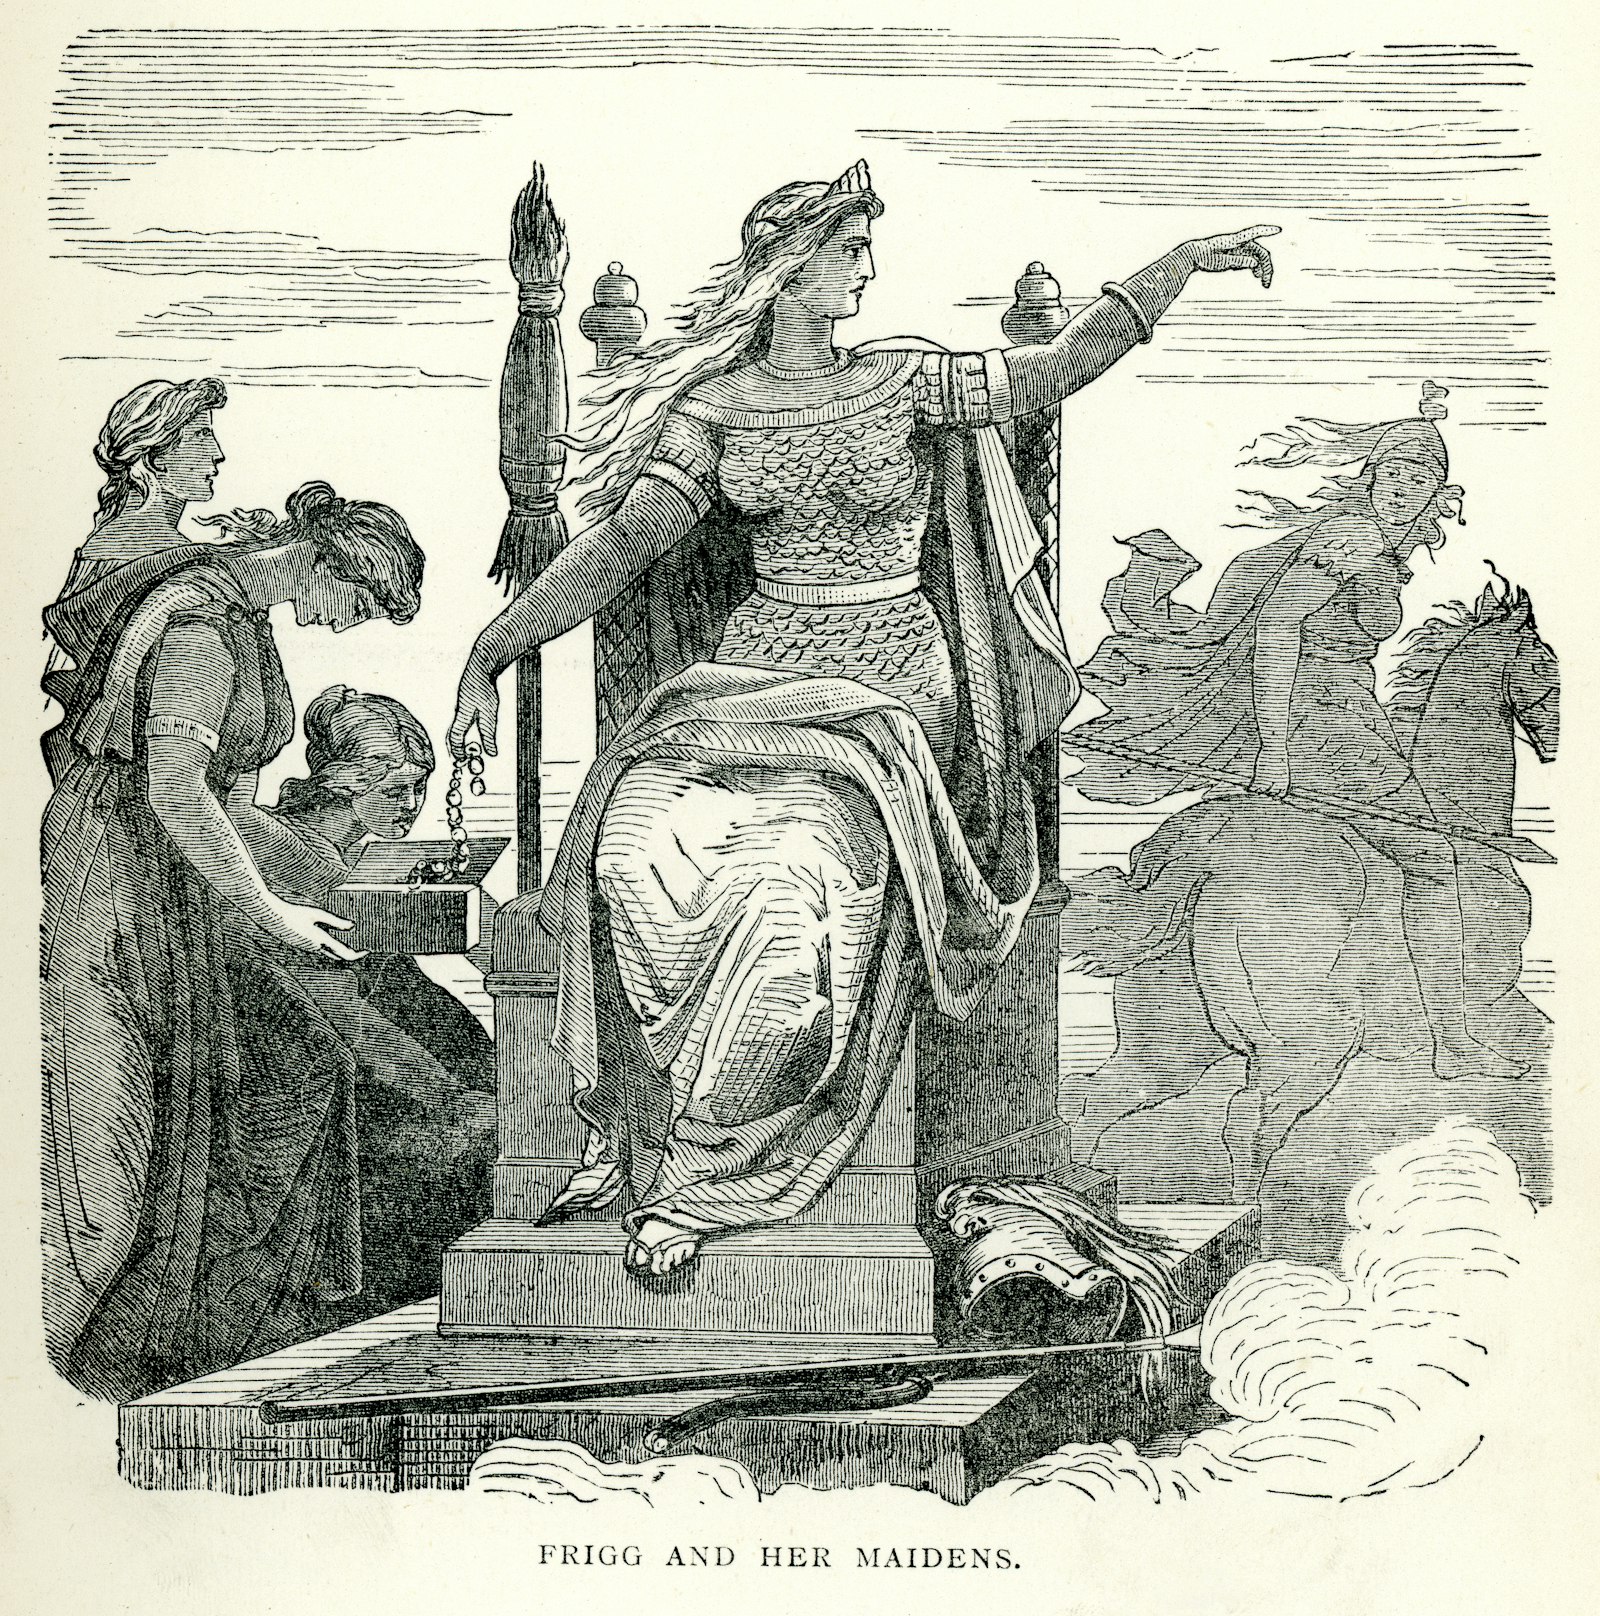 illustration of Frigg and her maidens